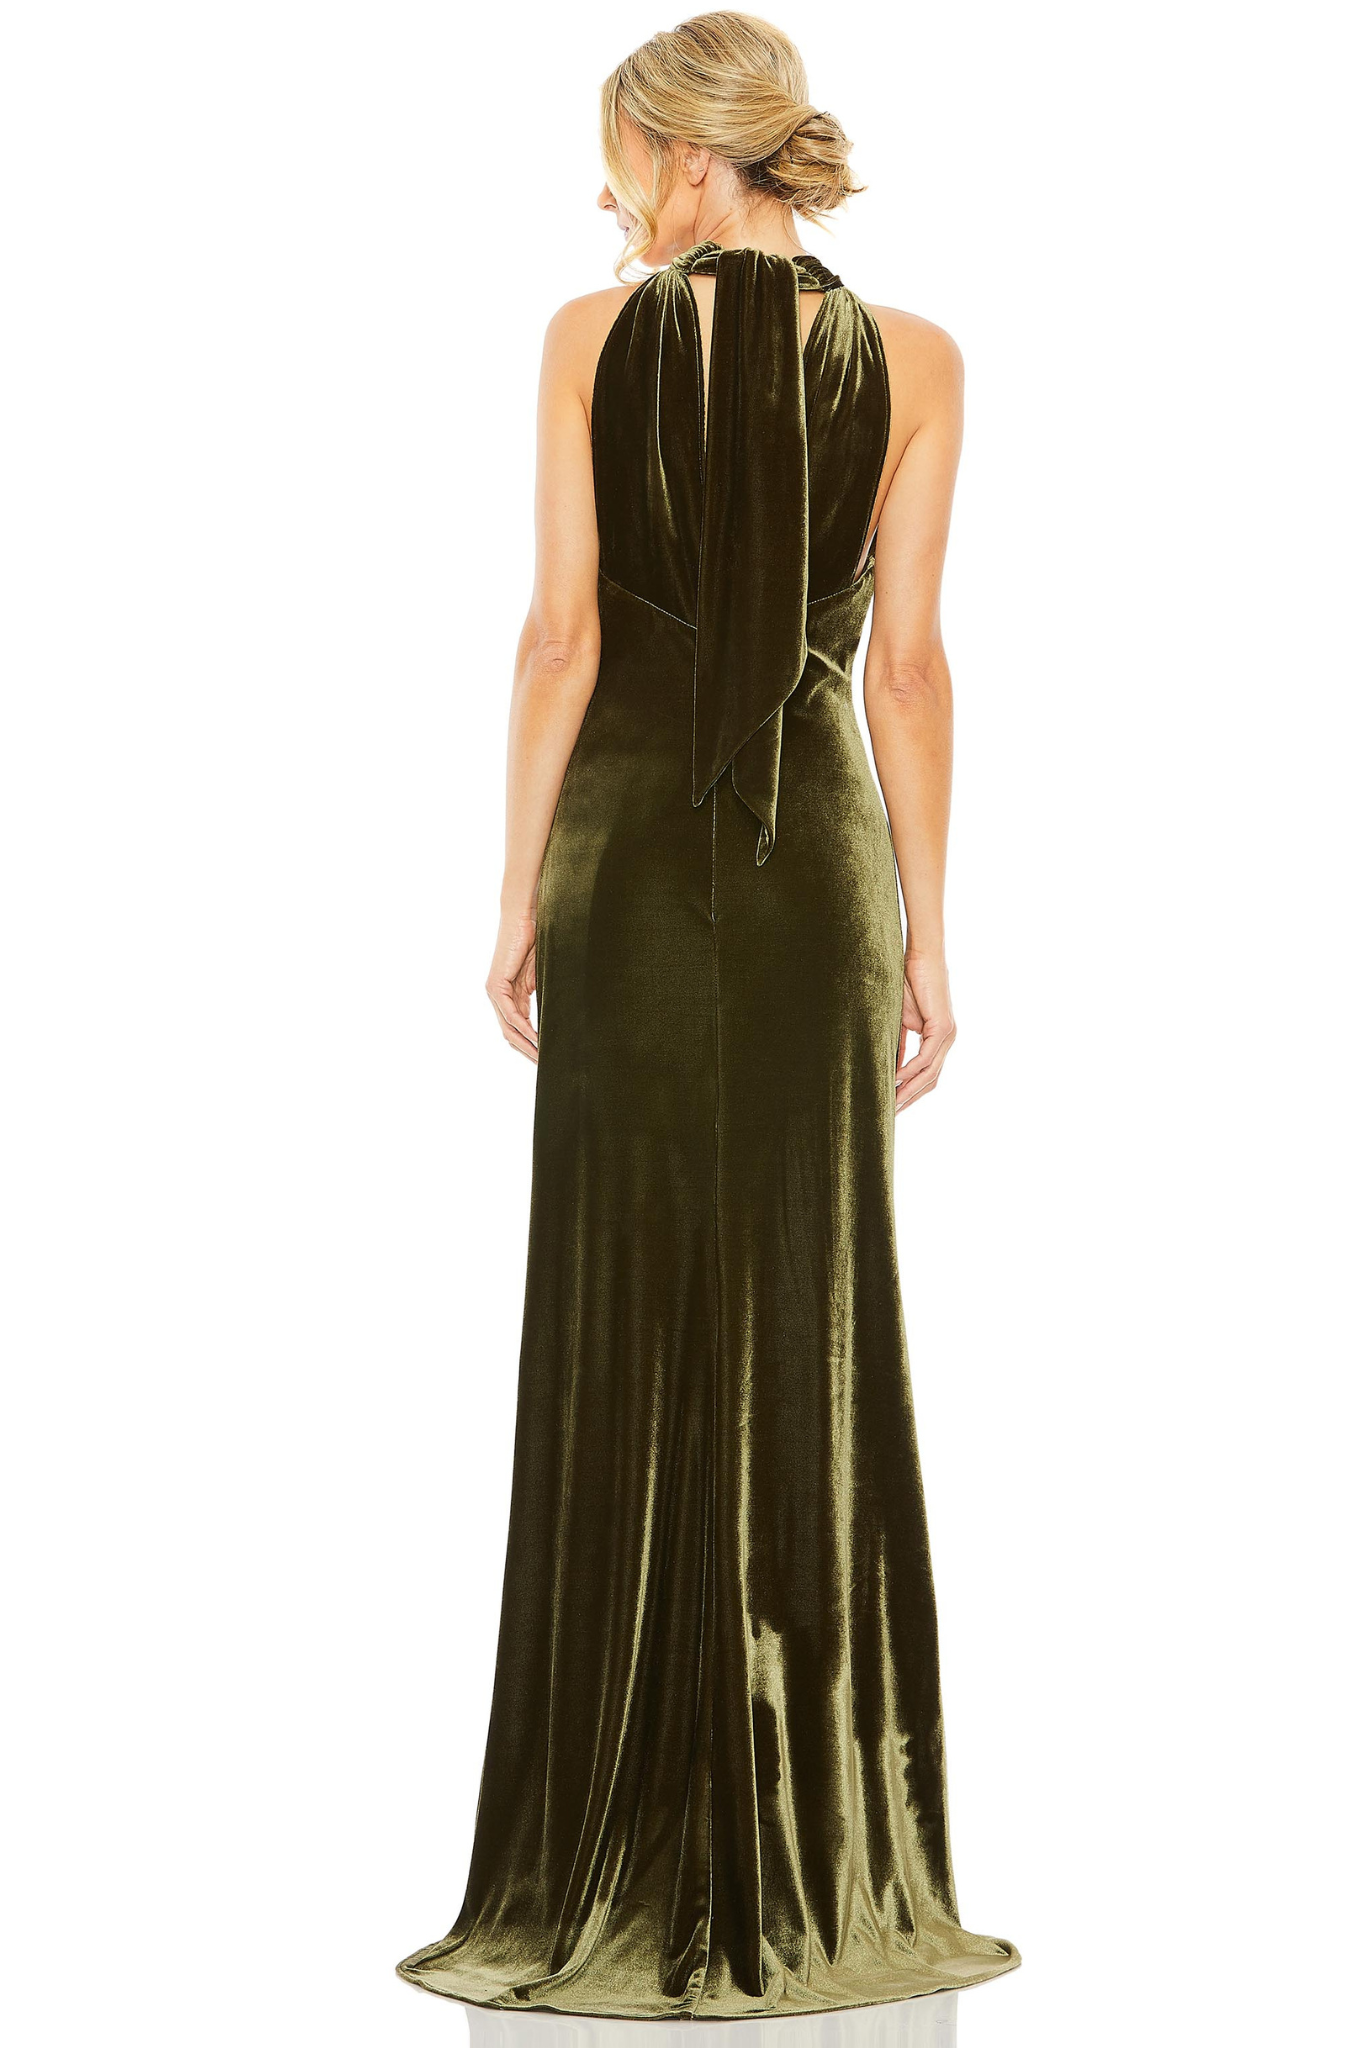 Pasha Halter Gown in Olive by Mac Duggal - RENTAL